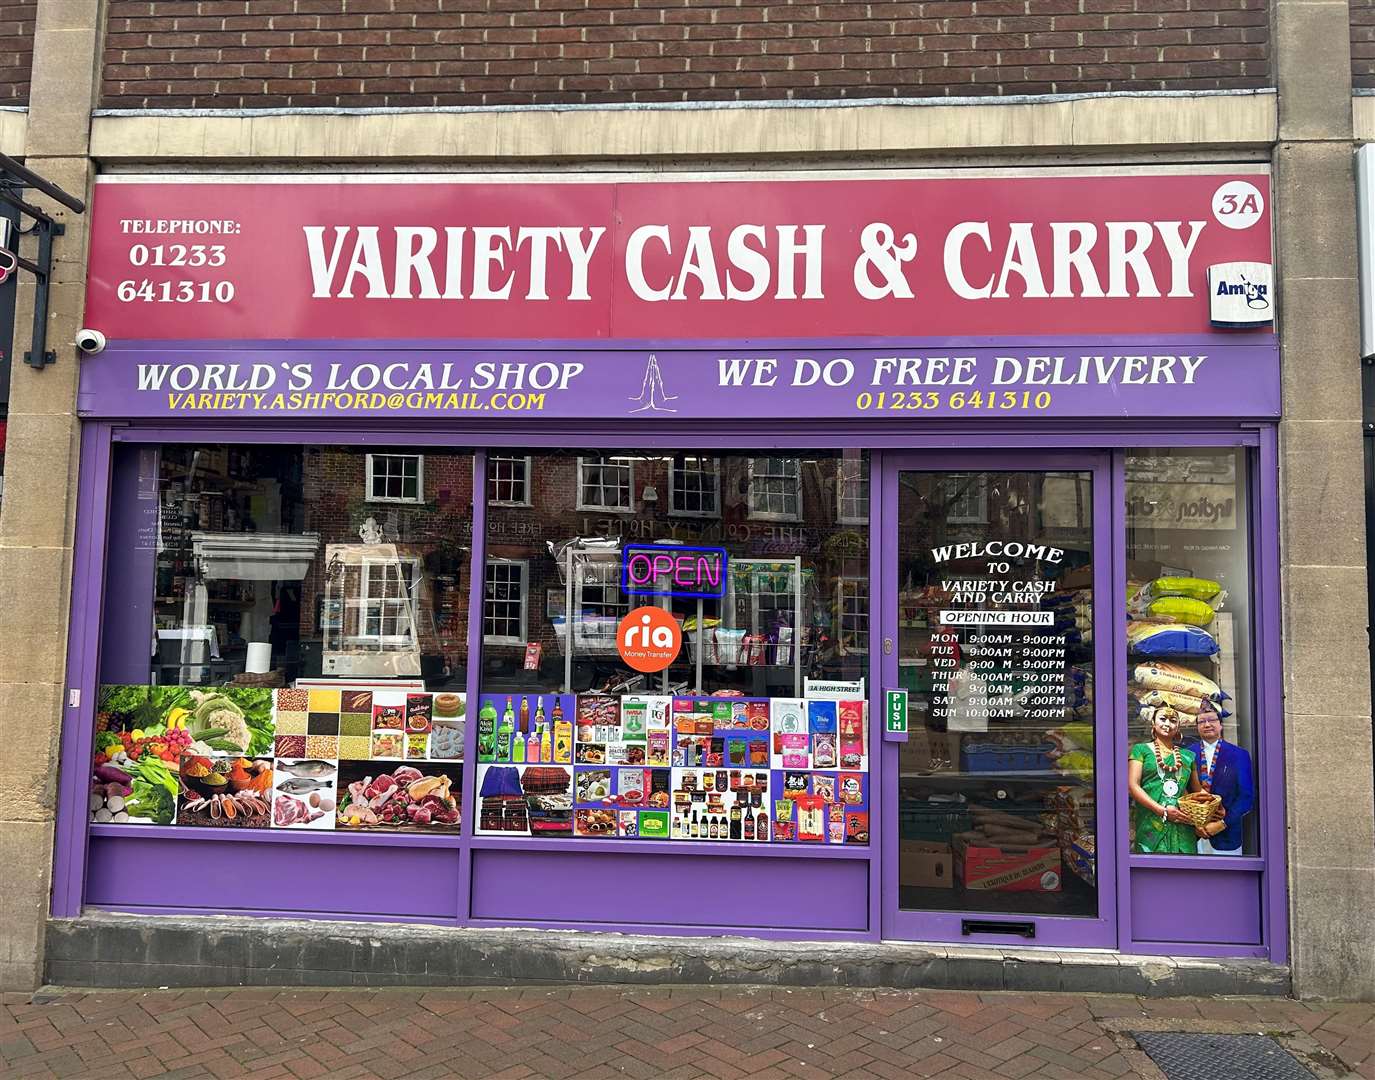 Variety Cash and Carry in Lower High Street, Ashford